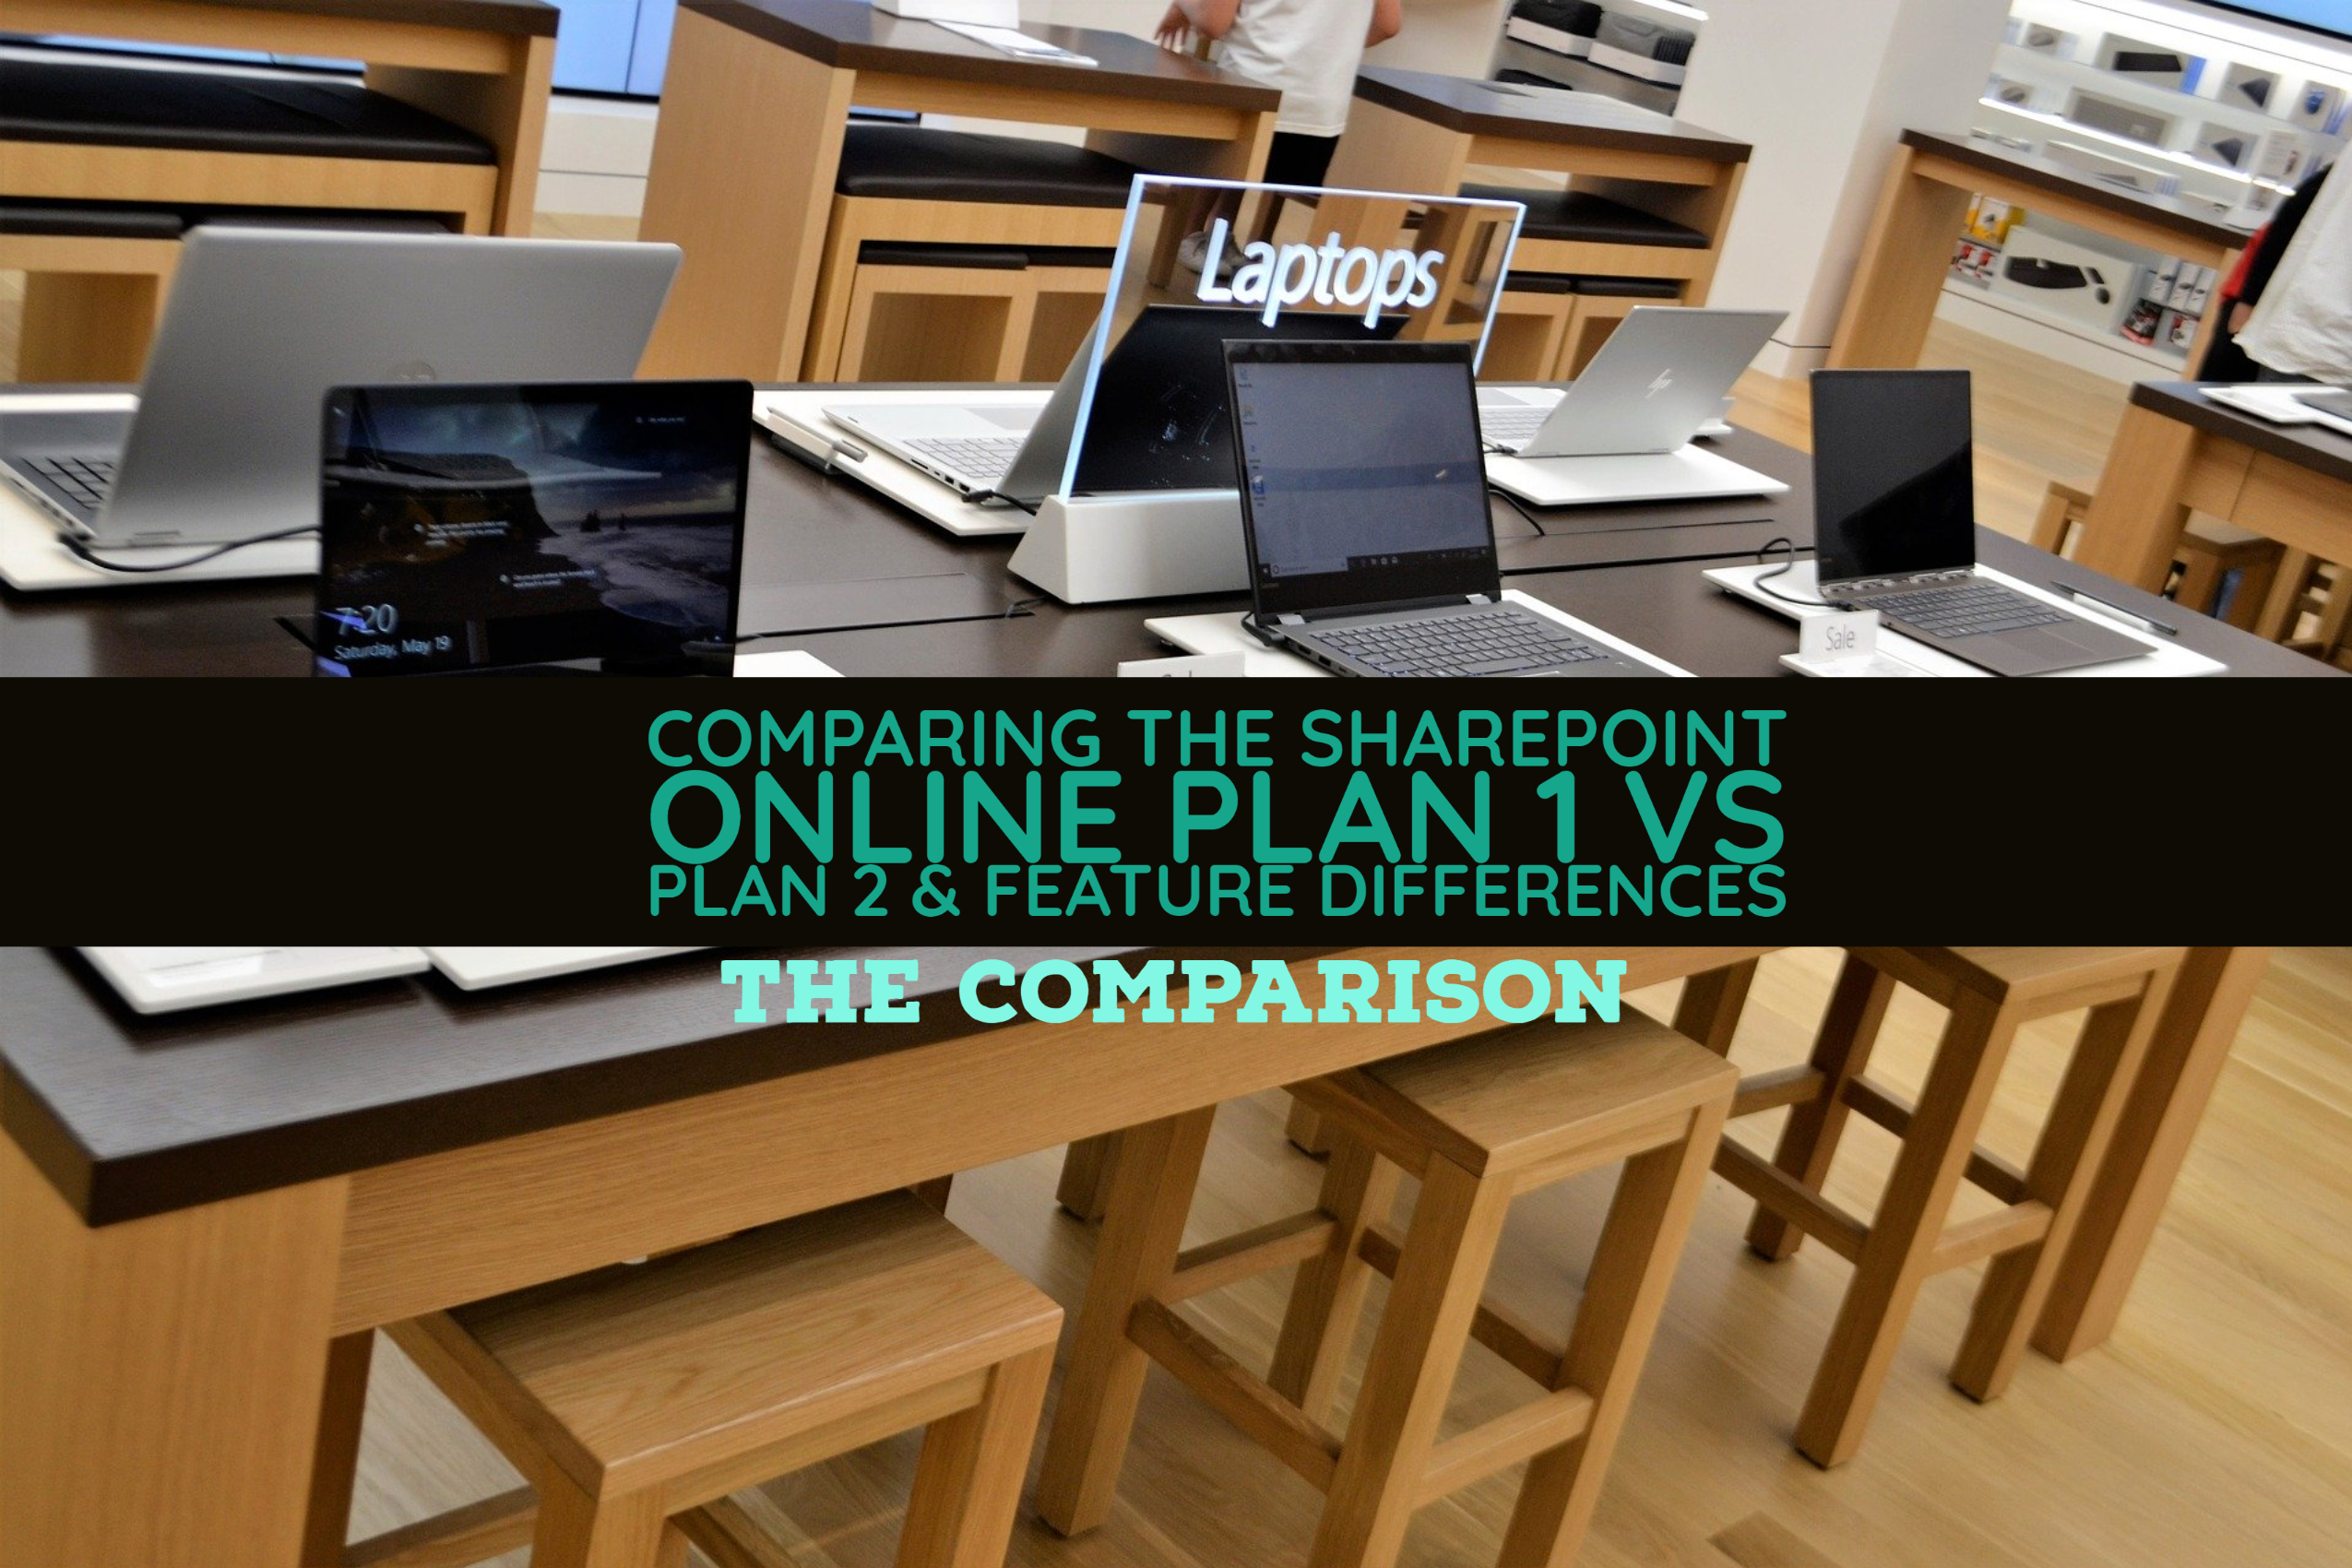 Comparing the SharePoint Online Plan 1 vs Plan 2 & Feature Differences